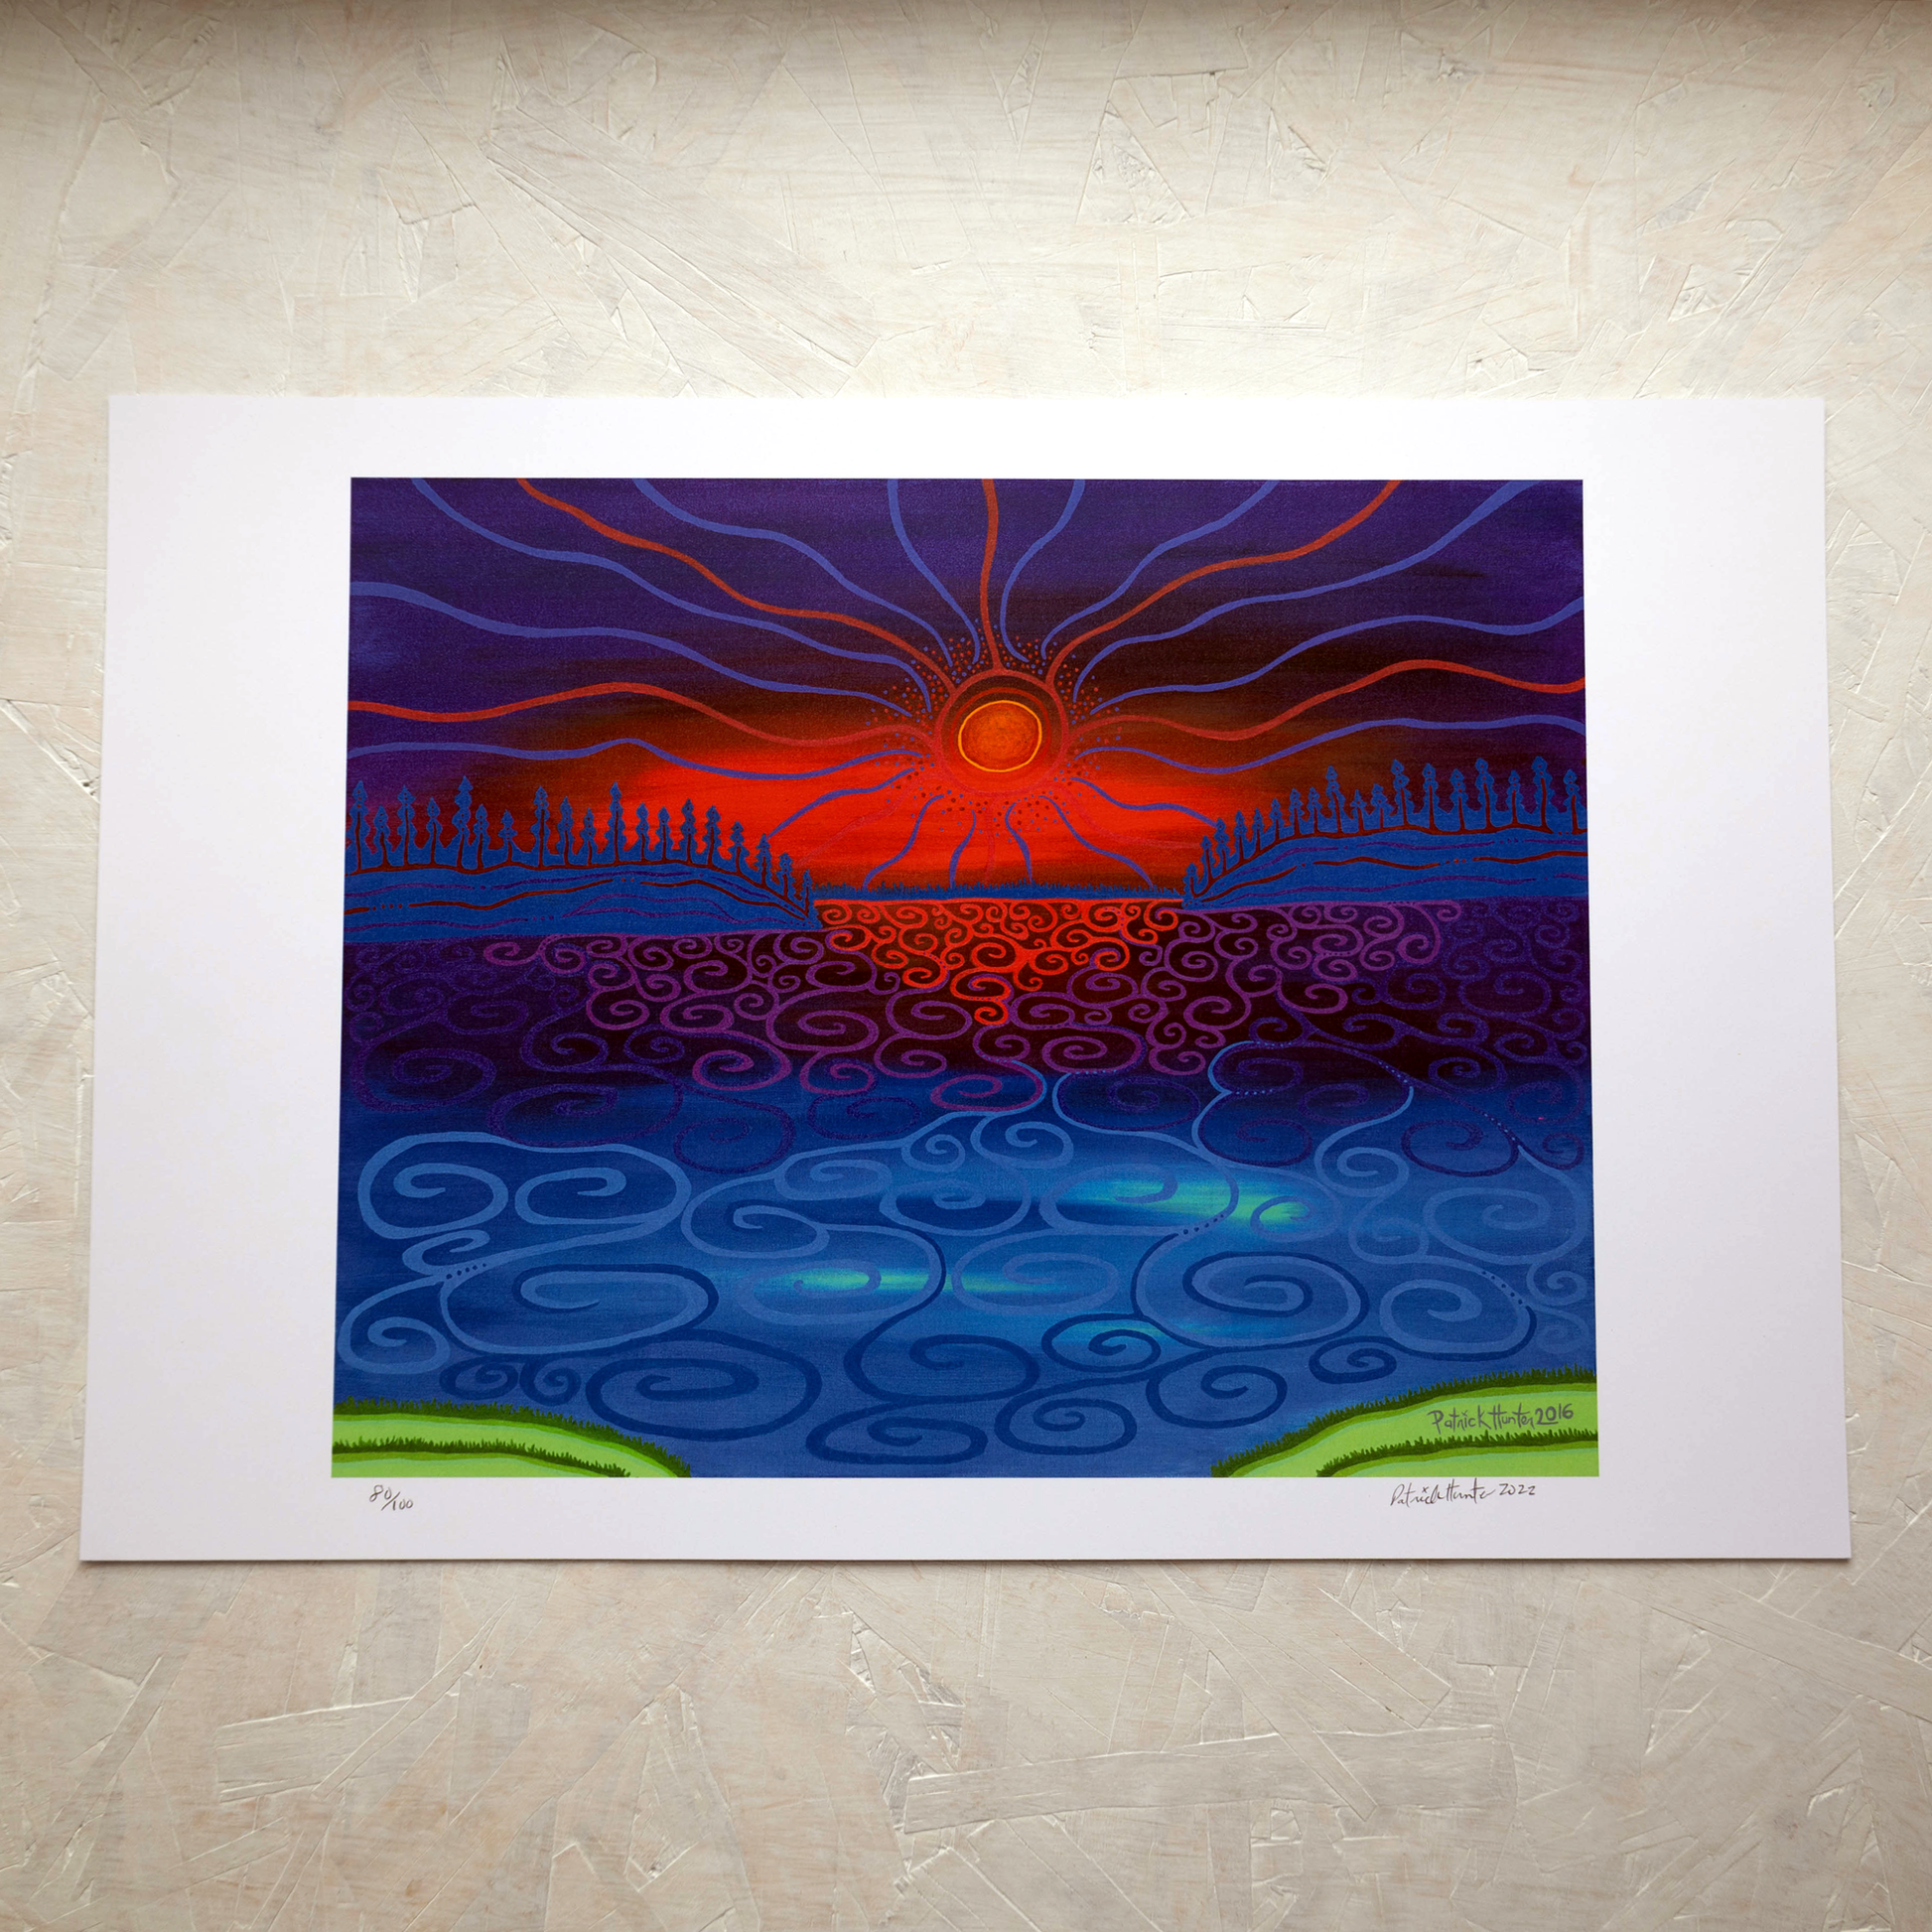 Print of Patrick Hunter's painting of a vibrant sunset over water, woodland art style.